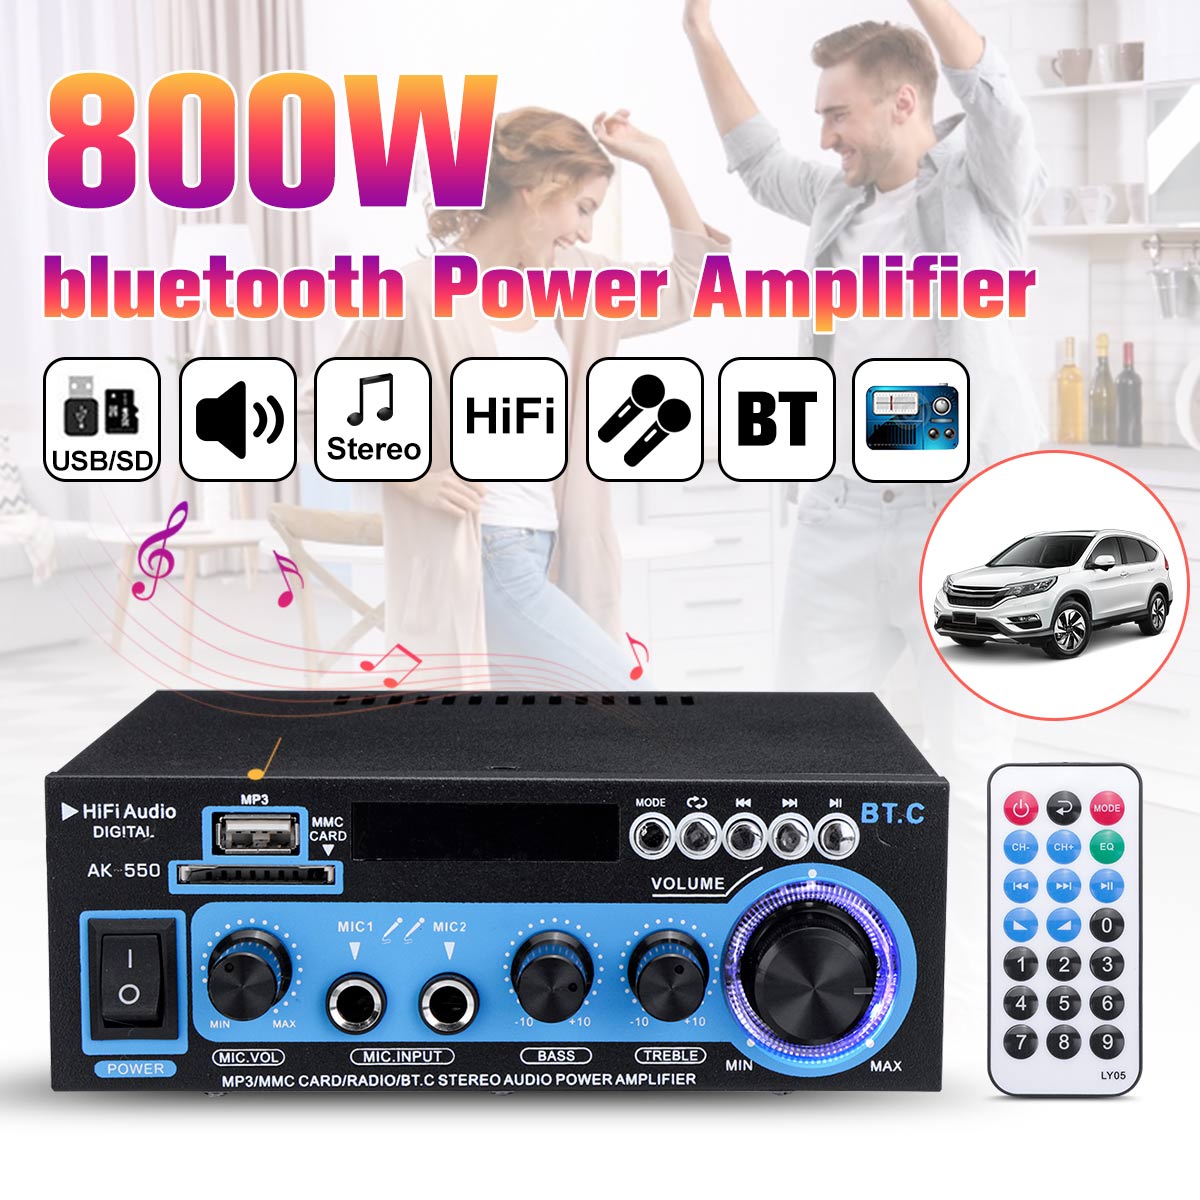 110/220V 800W Audio Amplifier 2CH LCD Display Digital HIFI Power Amplifier bluetooth FM Car Home Stereo Subwoofer W/Remote